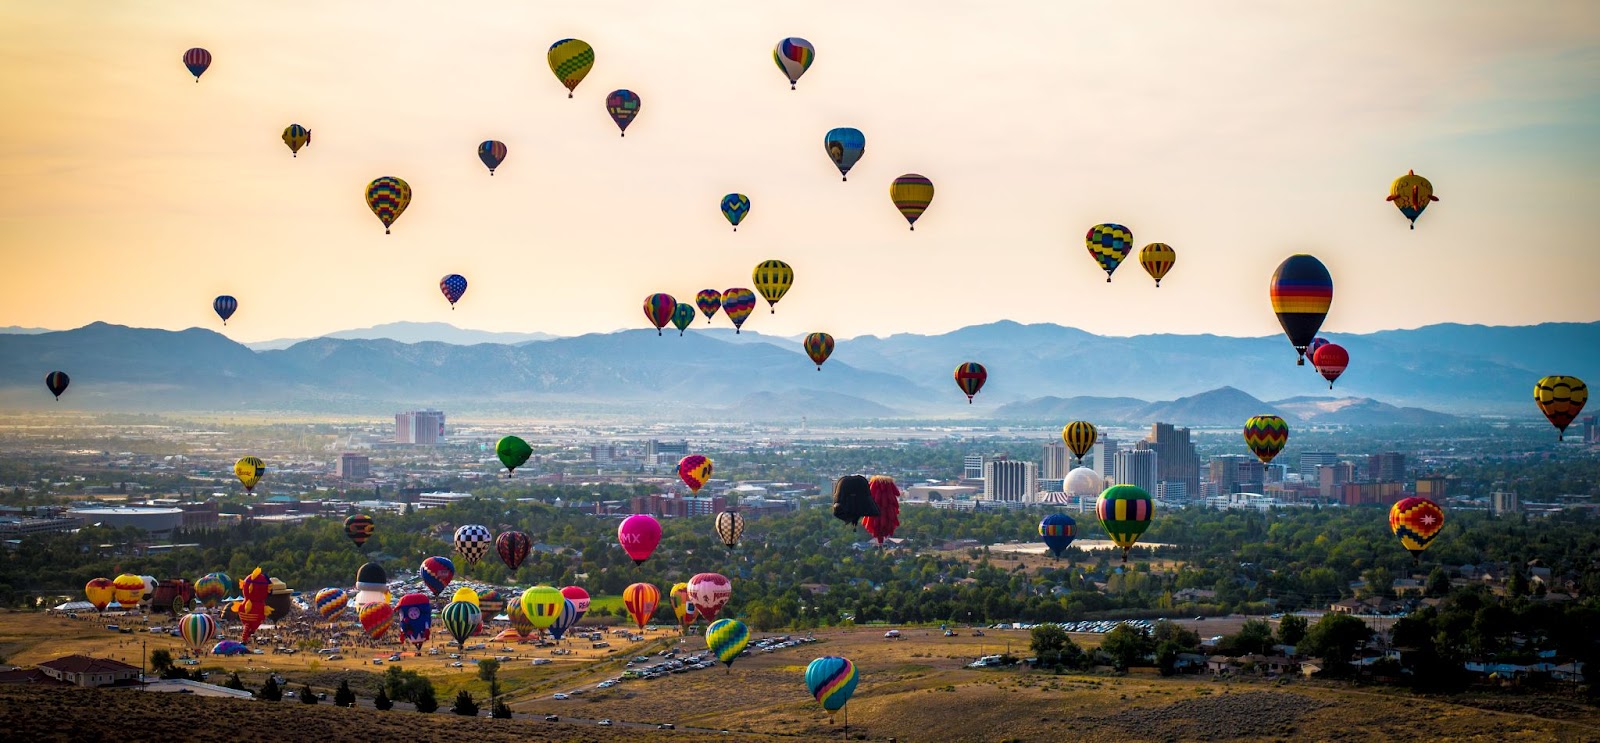 Things to Do in Lake Tahoe: The Great Reno Balloon Race